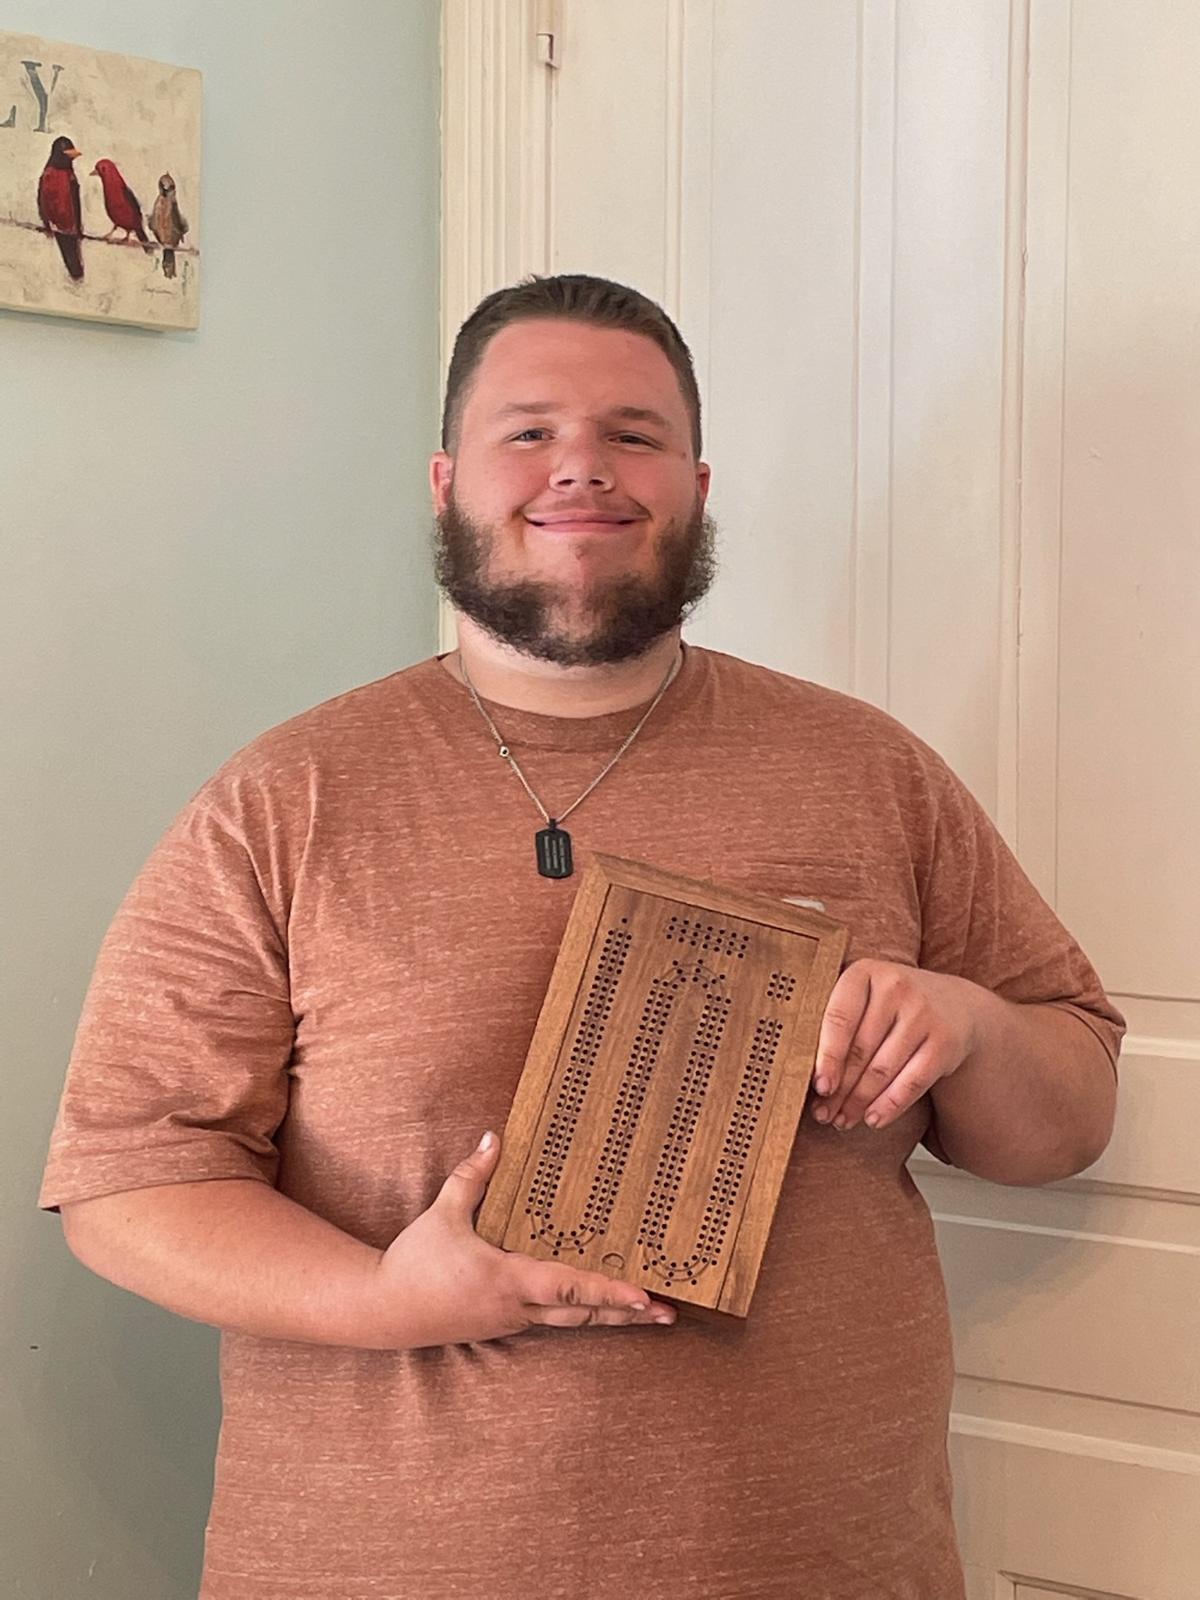 The happy customer holding his new cribbage box